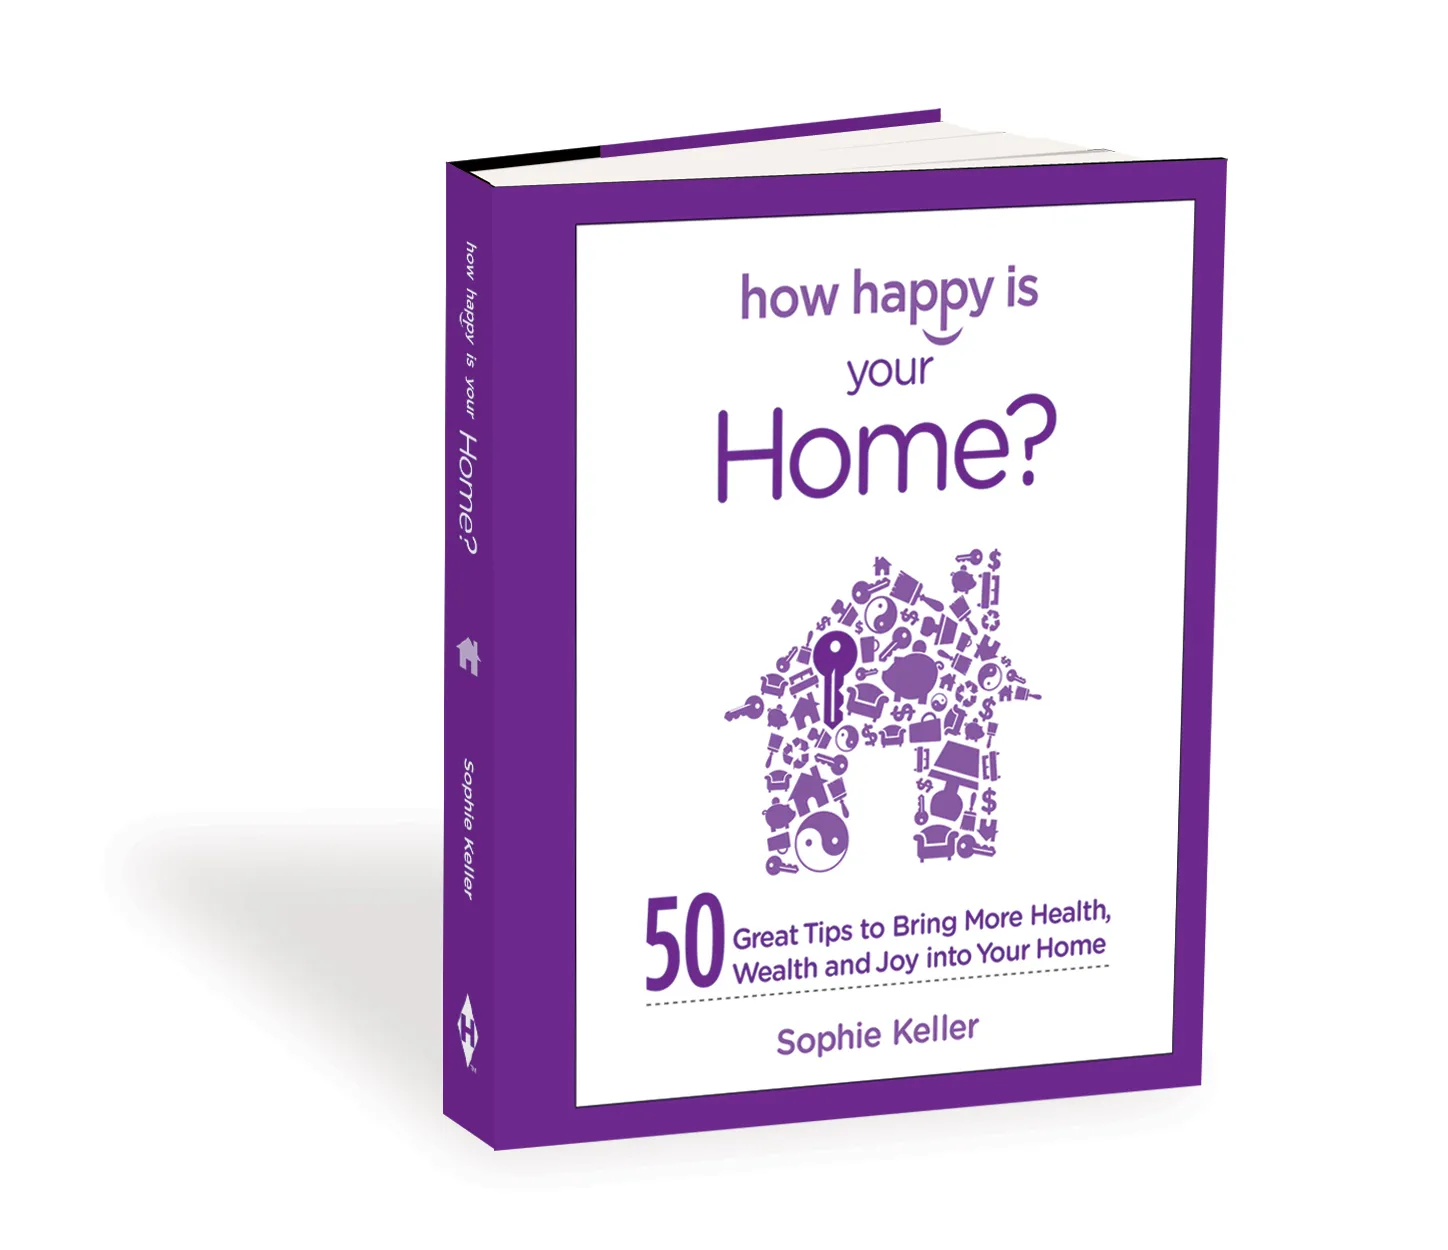 How Happy is Your Home? 50 Great Tips to Bring More Health, Wealth and Joy into Your Home